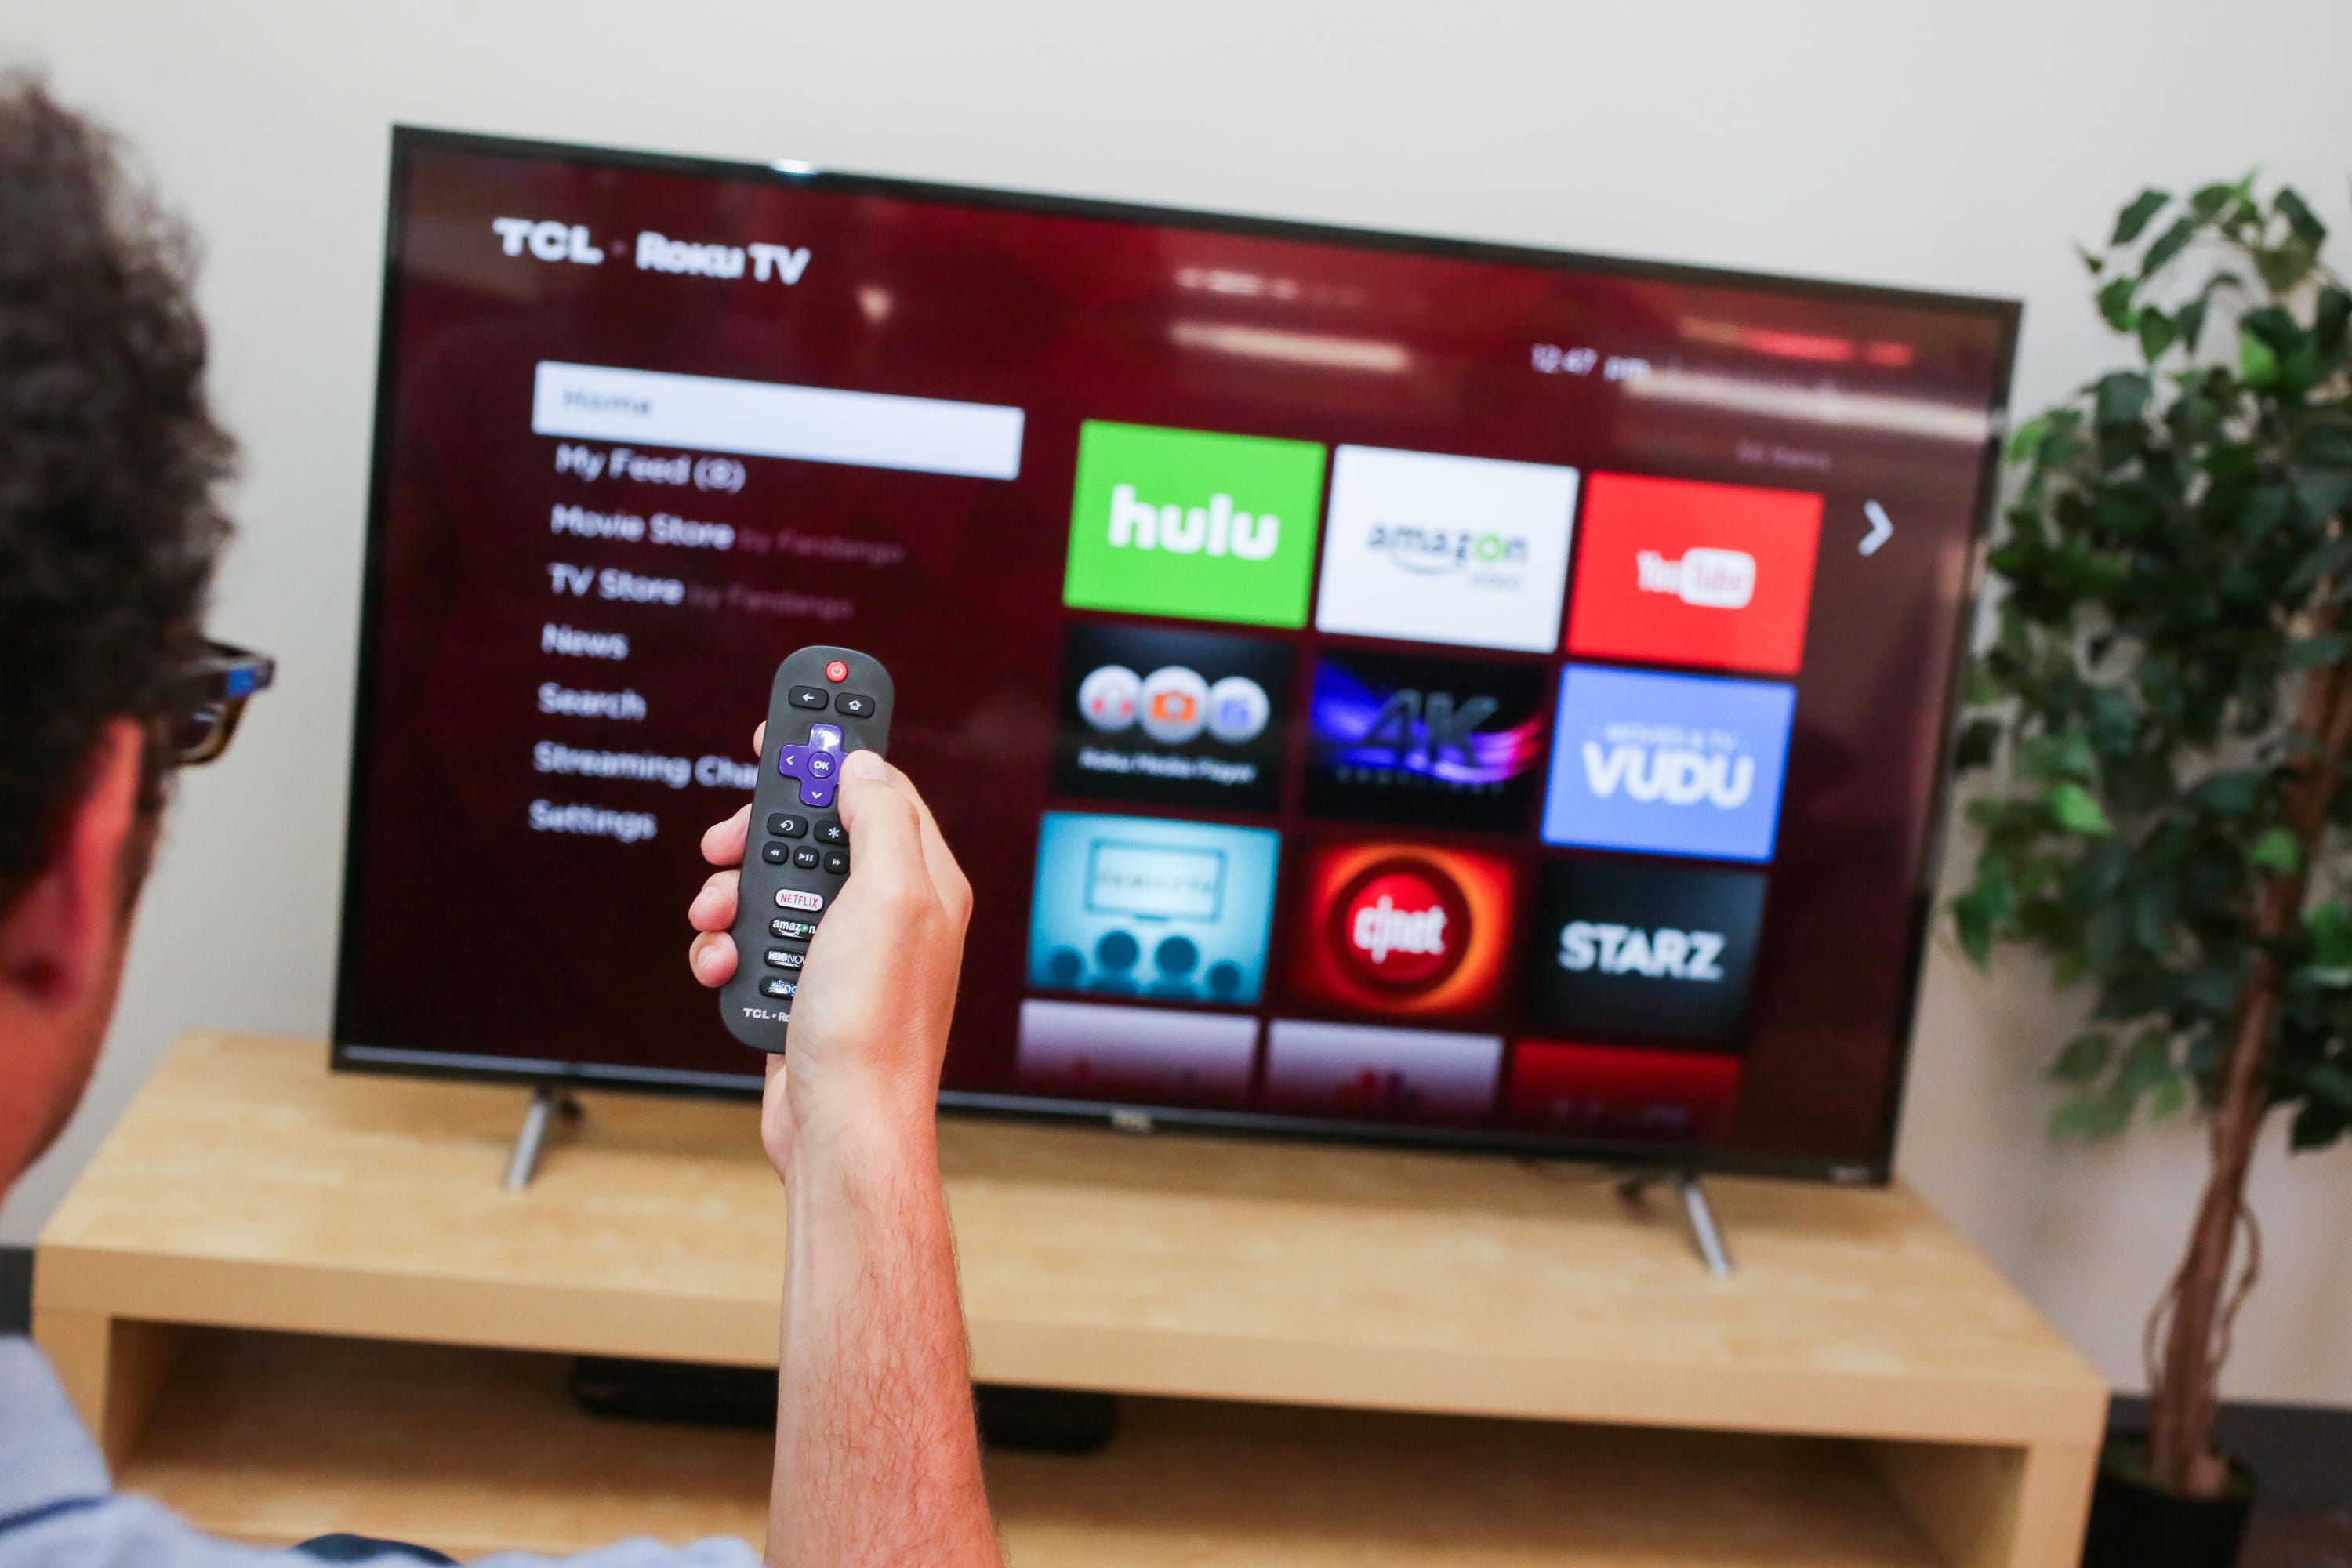 Tcl S405 Series Roku Tv 2017 Review The Best Smart Tv System In An Affordable 4k Tv Cnet